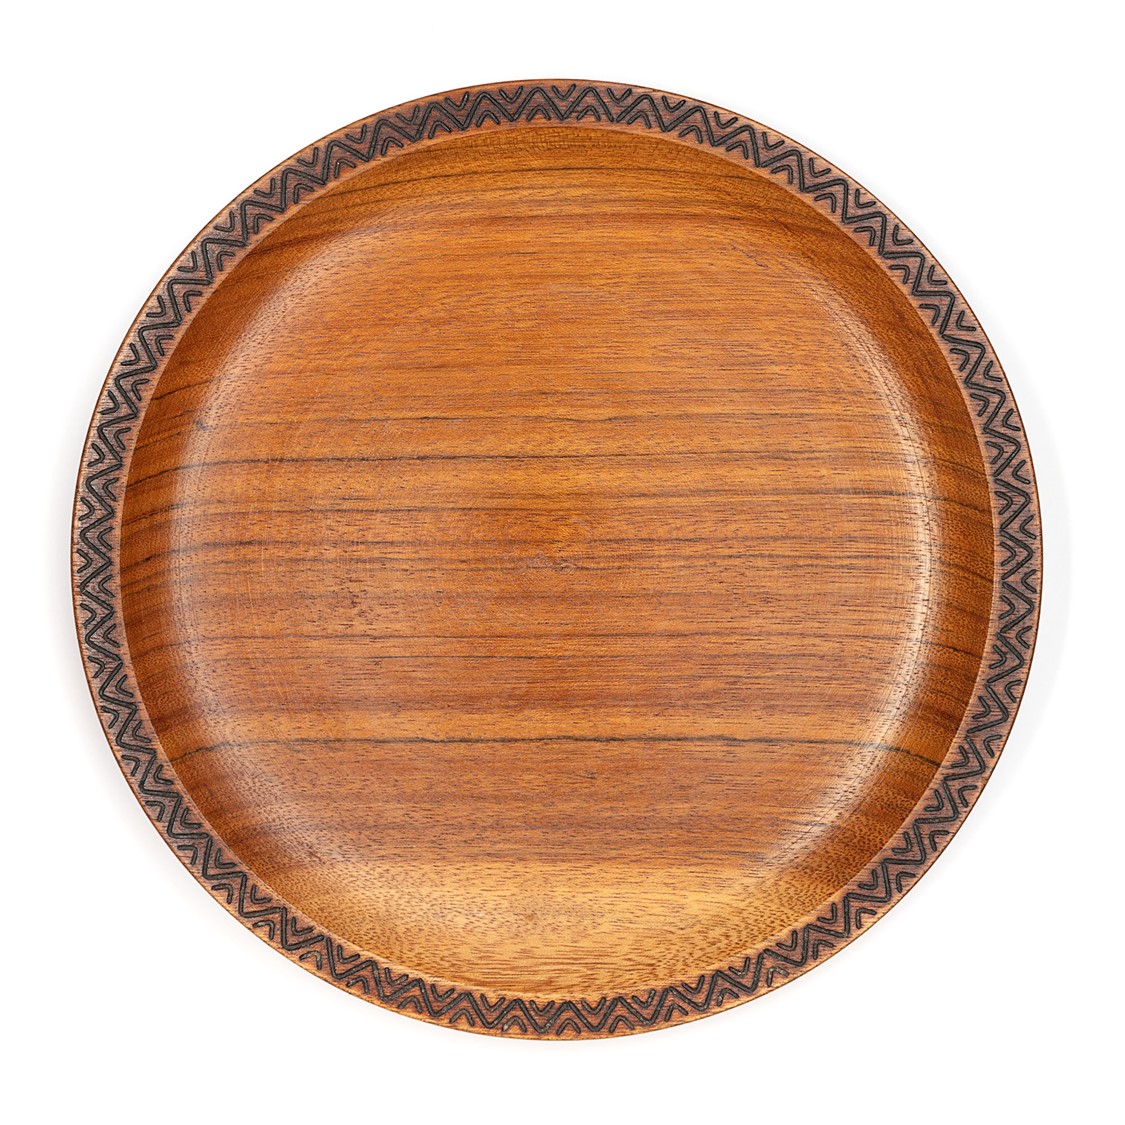 image of an ornamental plate in wood